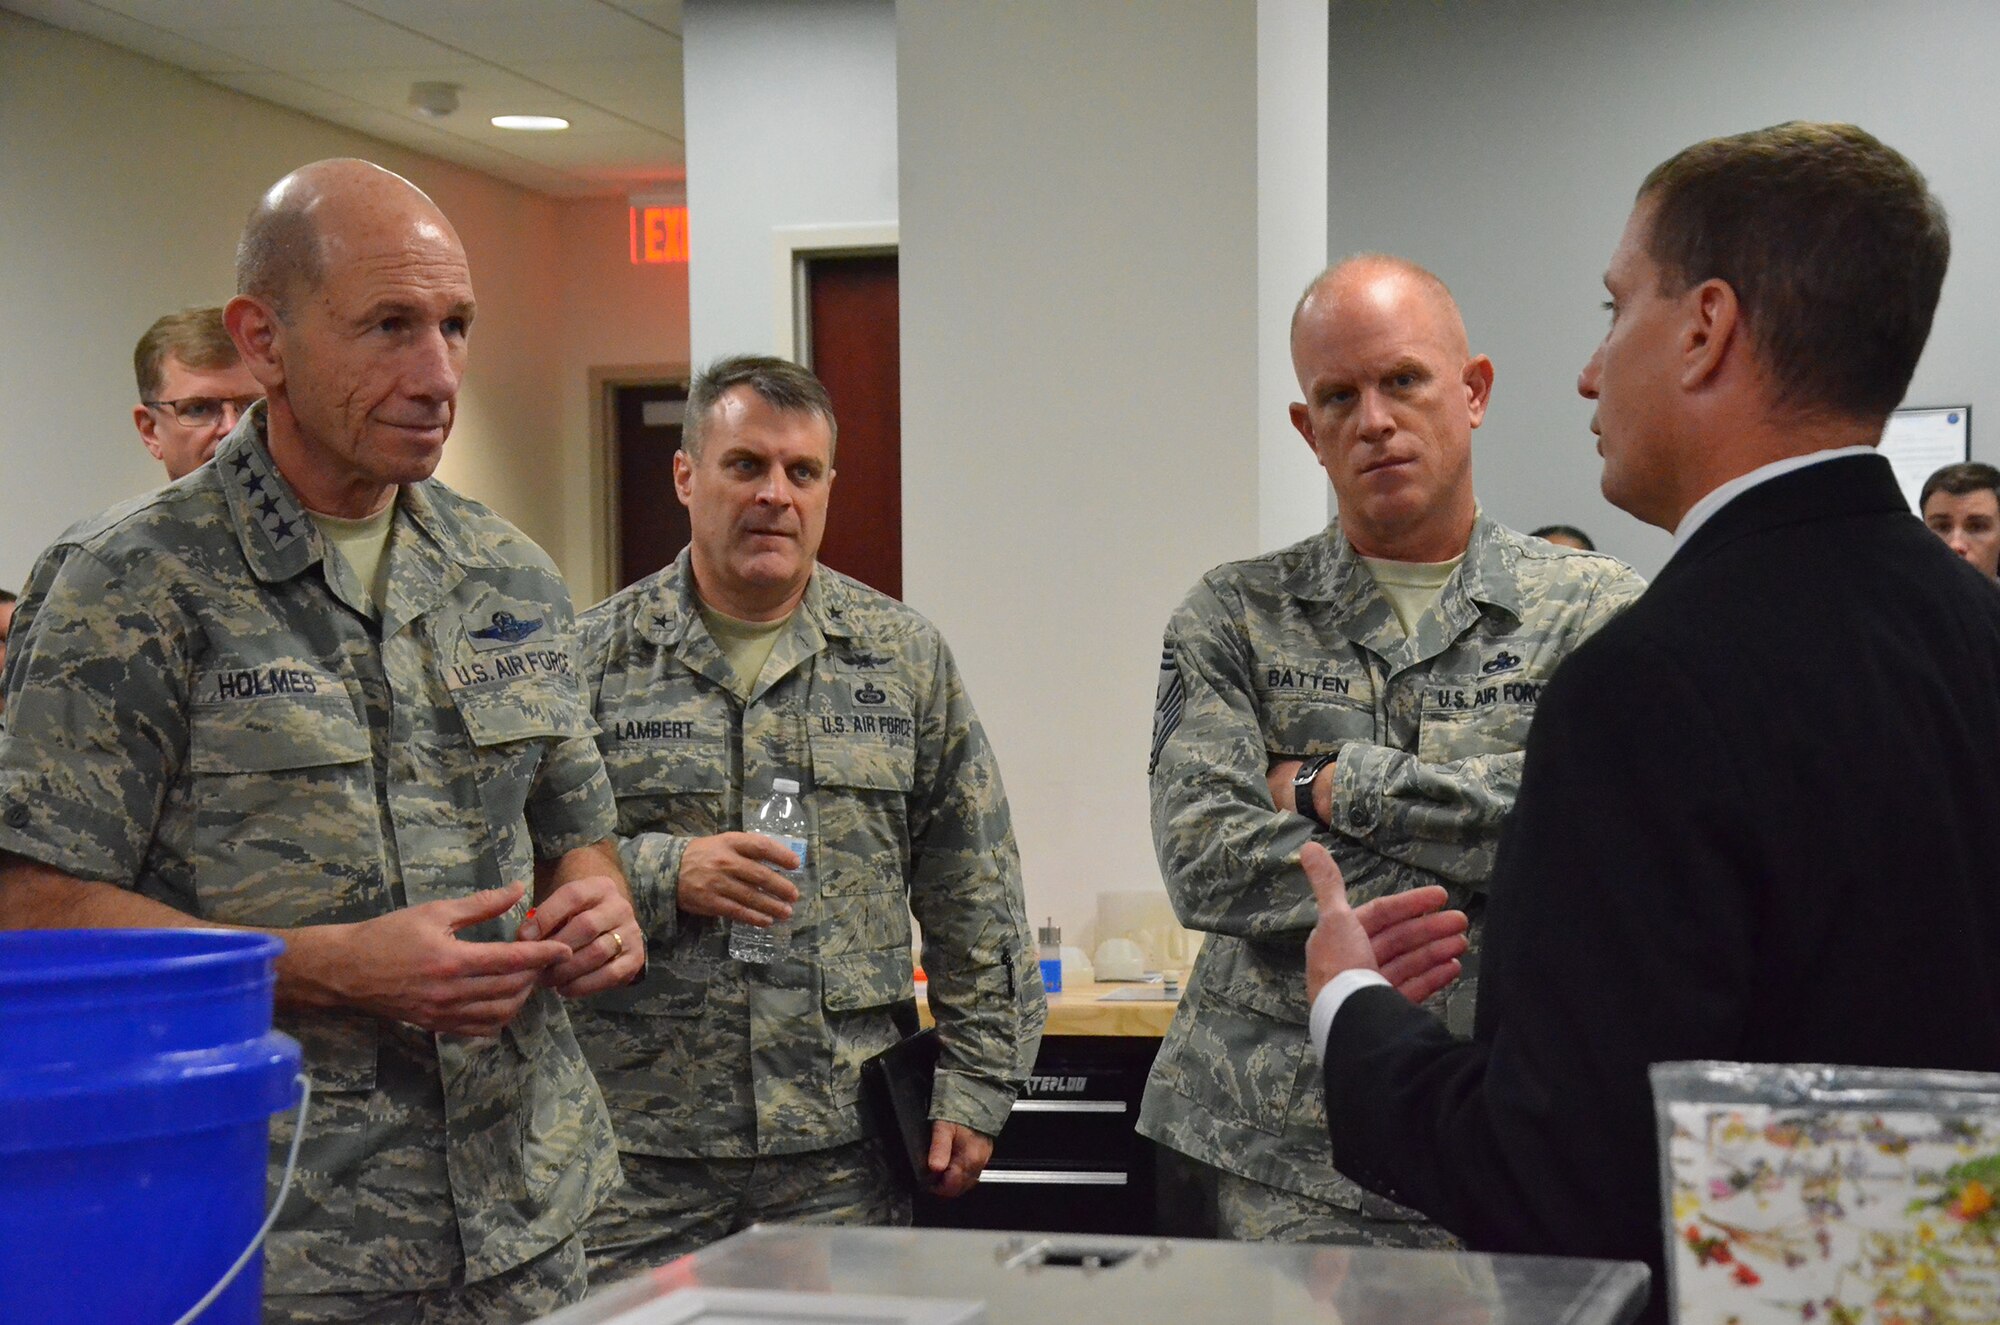 Kevin Jack (right), a radio frequency engineer at the Air Force Technical Applications Center, Patrick AFB, Fla., explains rapid prototyping of deployable antenna systems to (l. to r.) Gen. Mike Holmes, commander of Air Combat Command, Brig. Gen. Peter Lambert, ACC director of intelligence, and Chief Master Sgt. Frank Batten, ACC command chief, during their visit to the Department of Defense's sole nuclear treaty monitoring center Jan. 24, 2018.  (U.S. Air Force photo by Susan A. Romano)